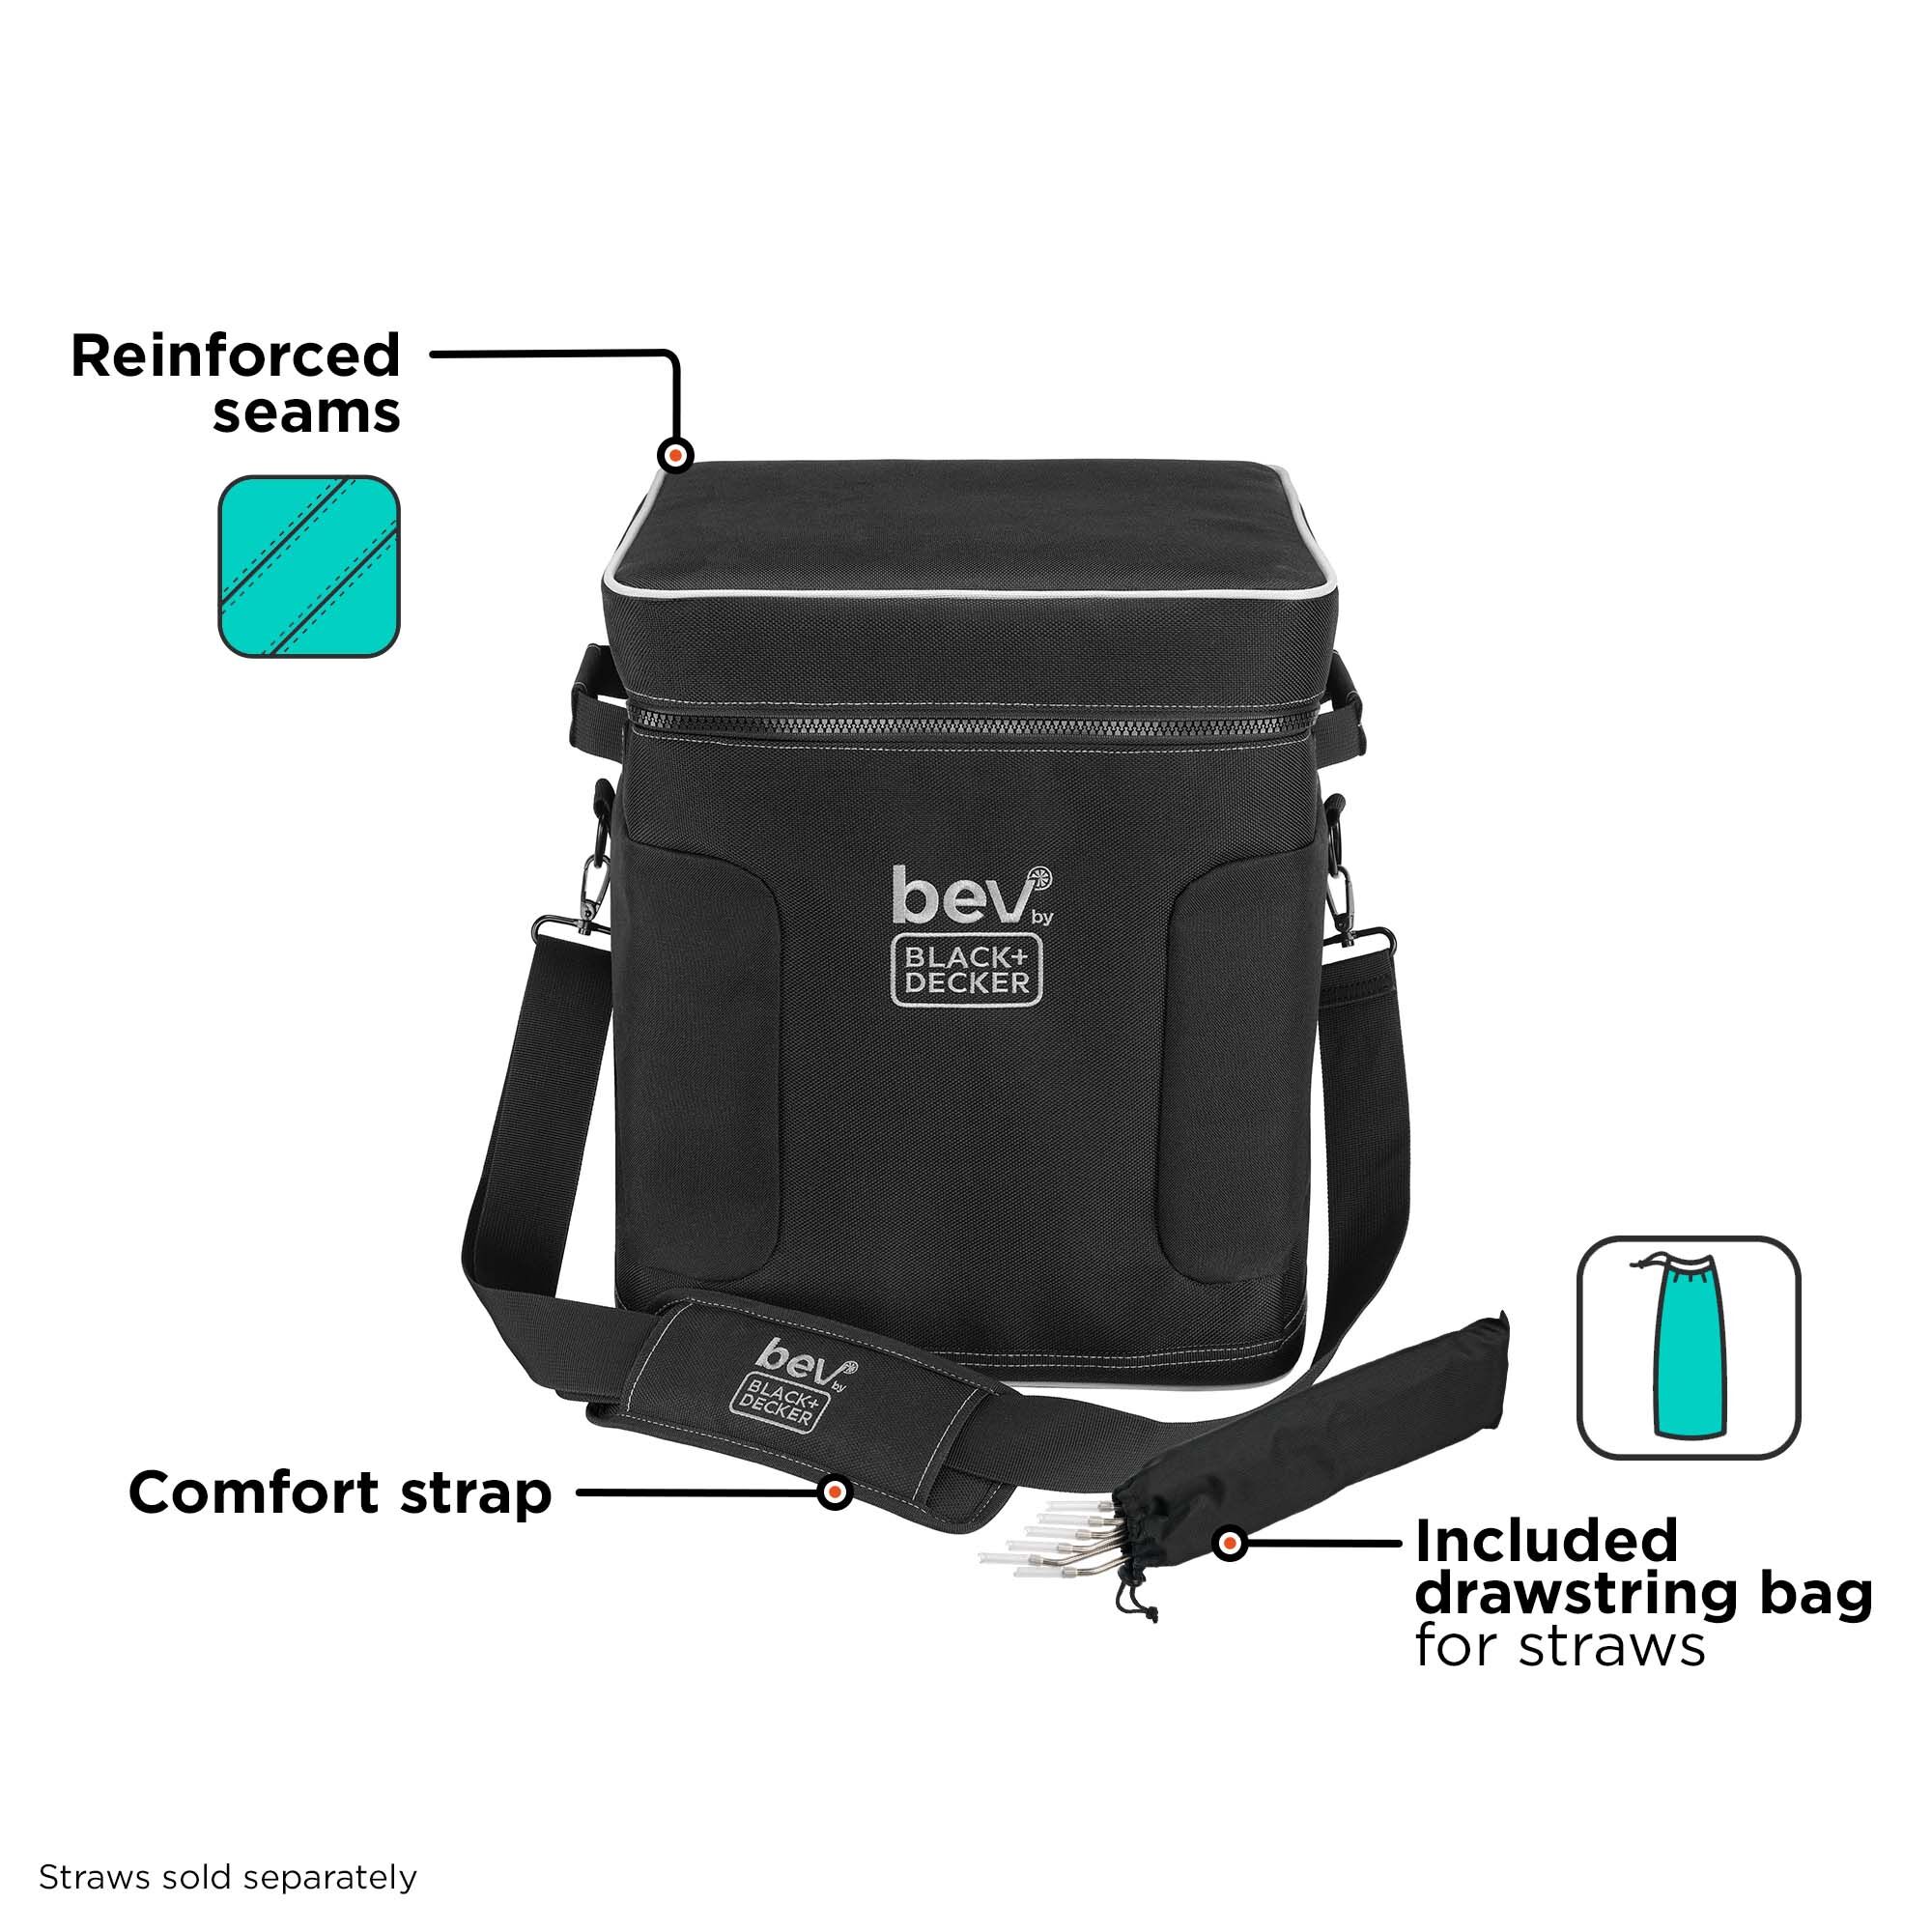 Exterior features on the storage bag include reinforced seams, comfort shoulder strap and an accessory bag